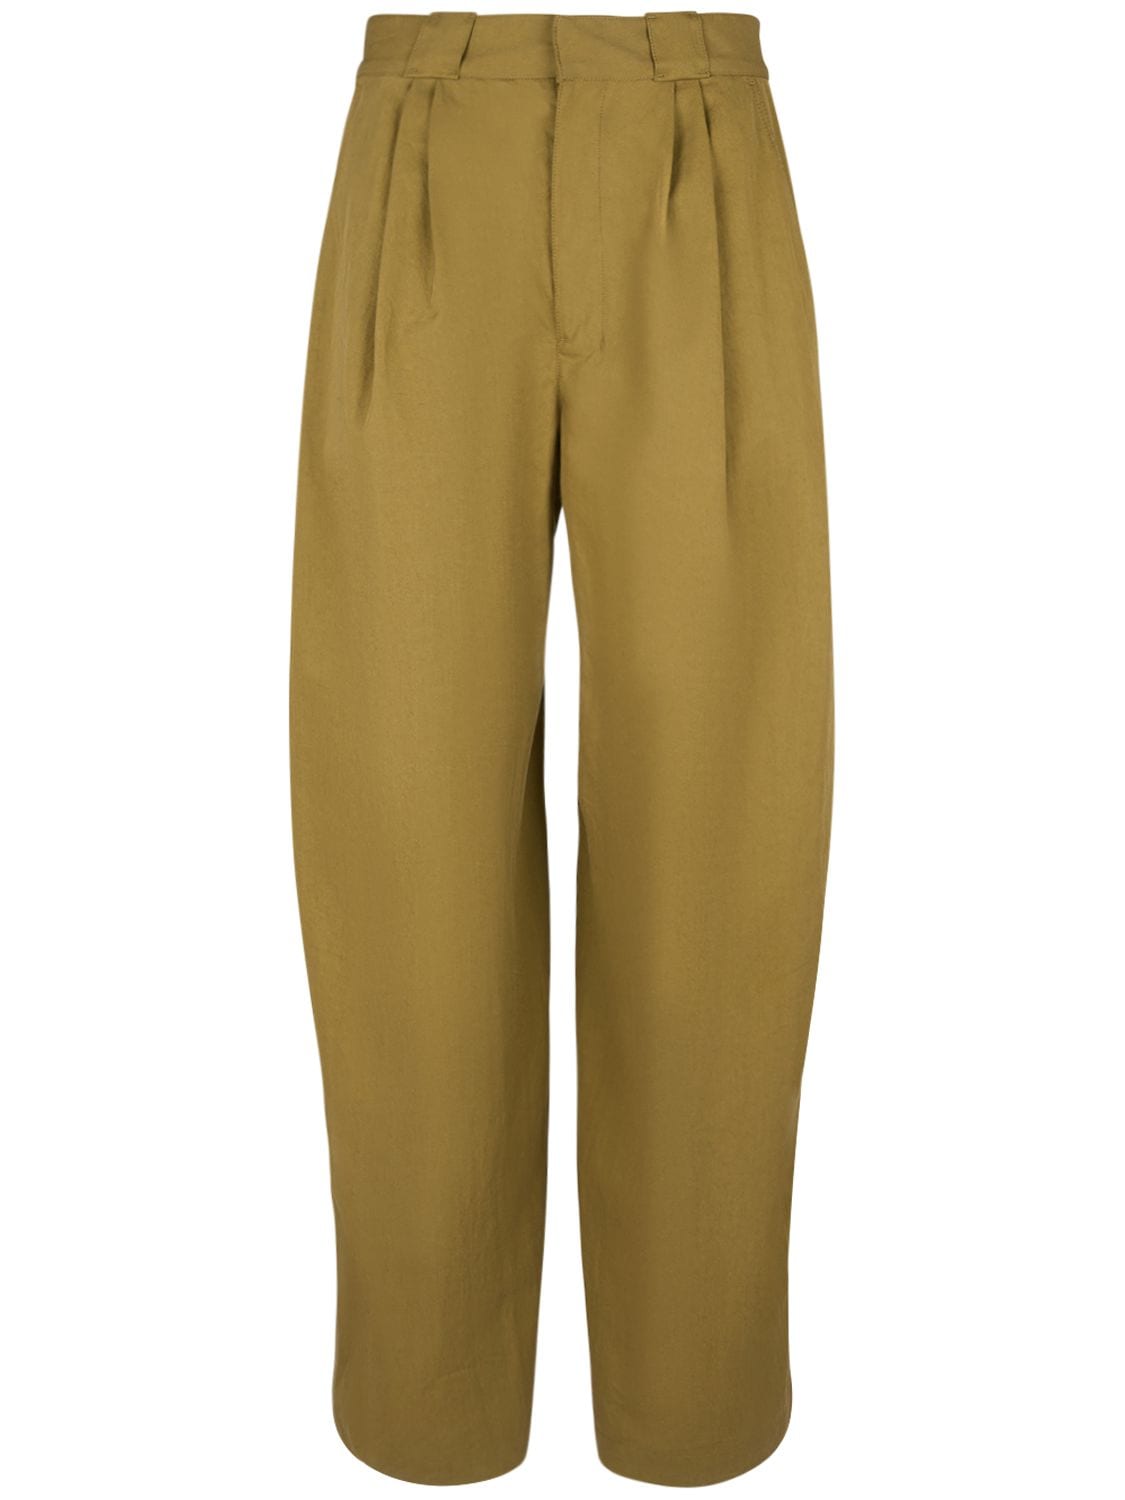 Image of Wide Leg Pleated Cotton Pants